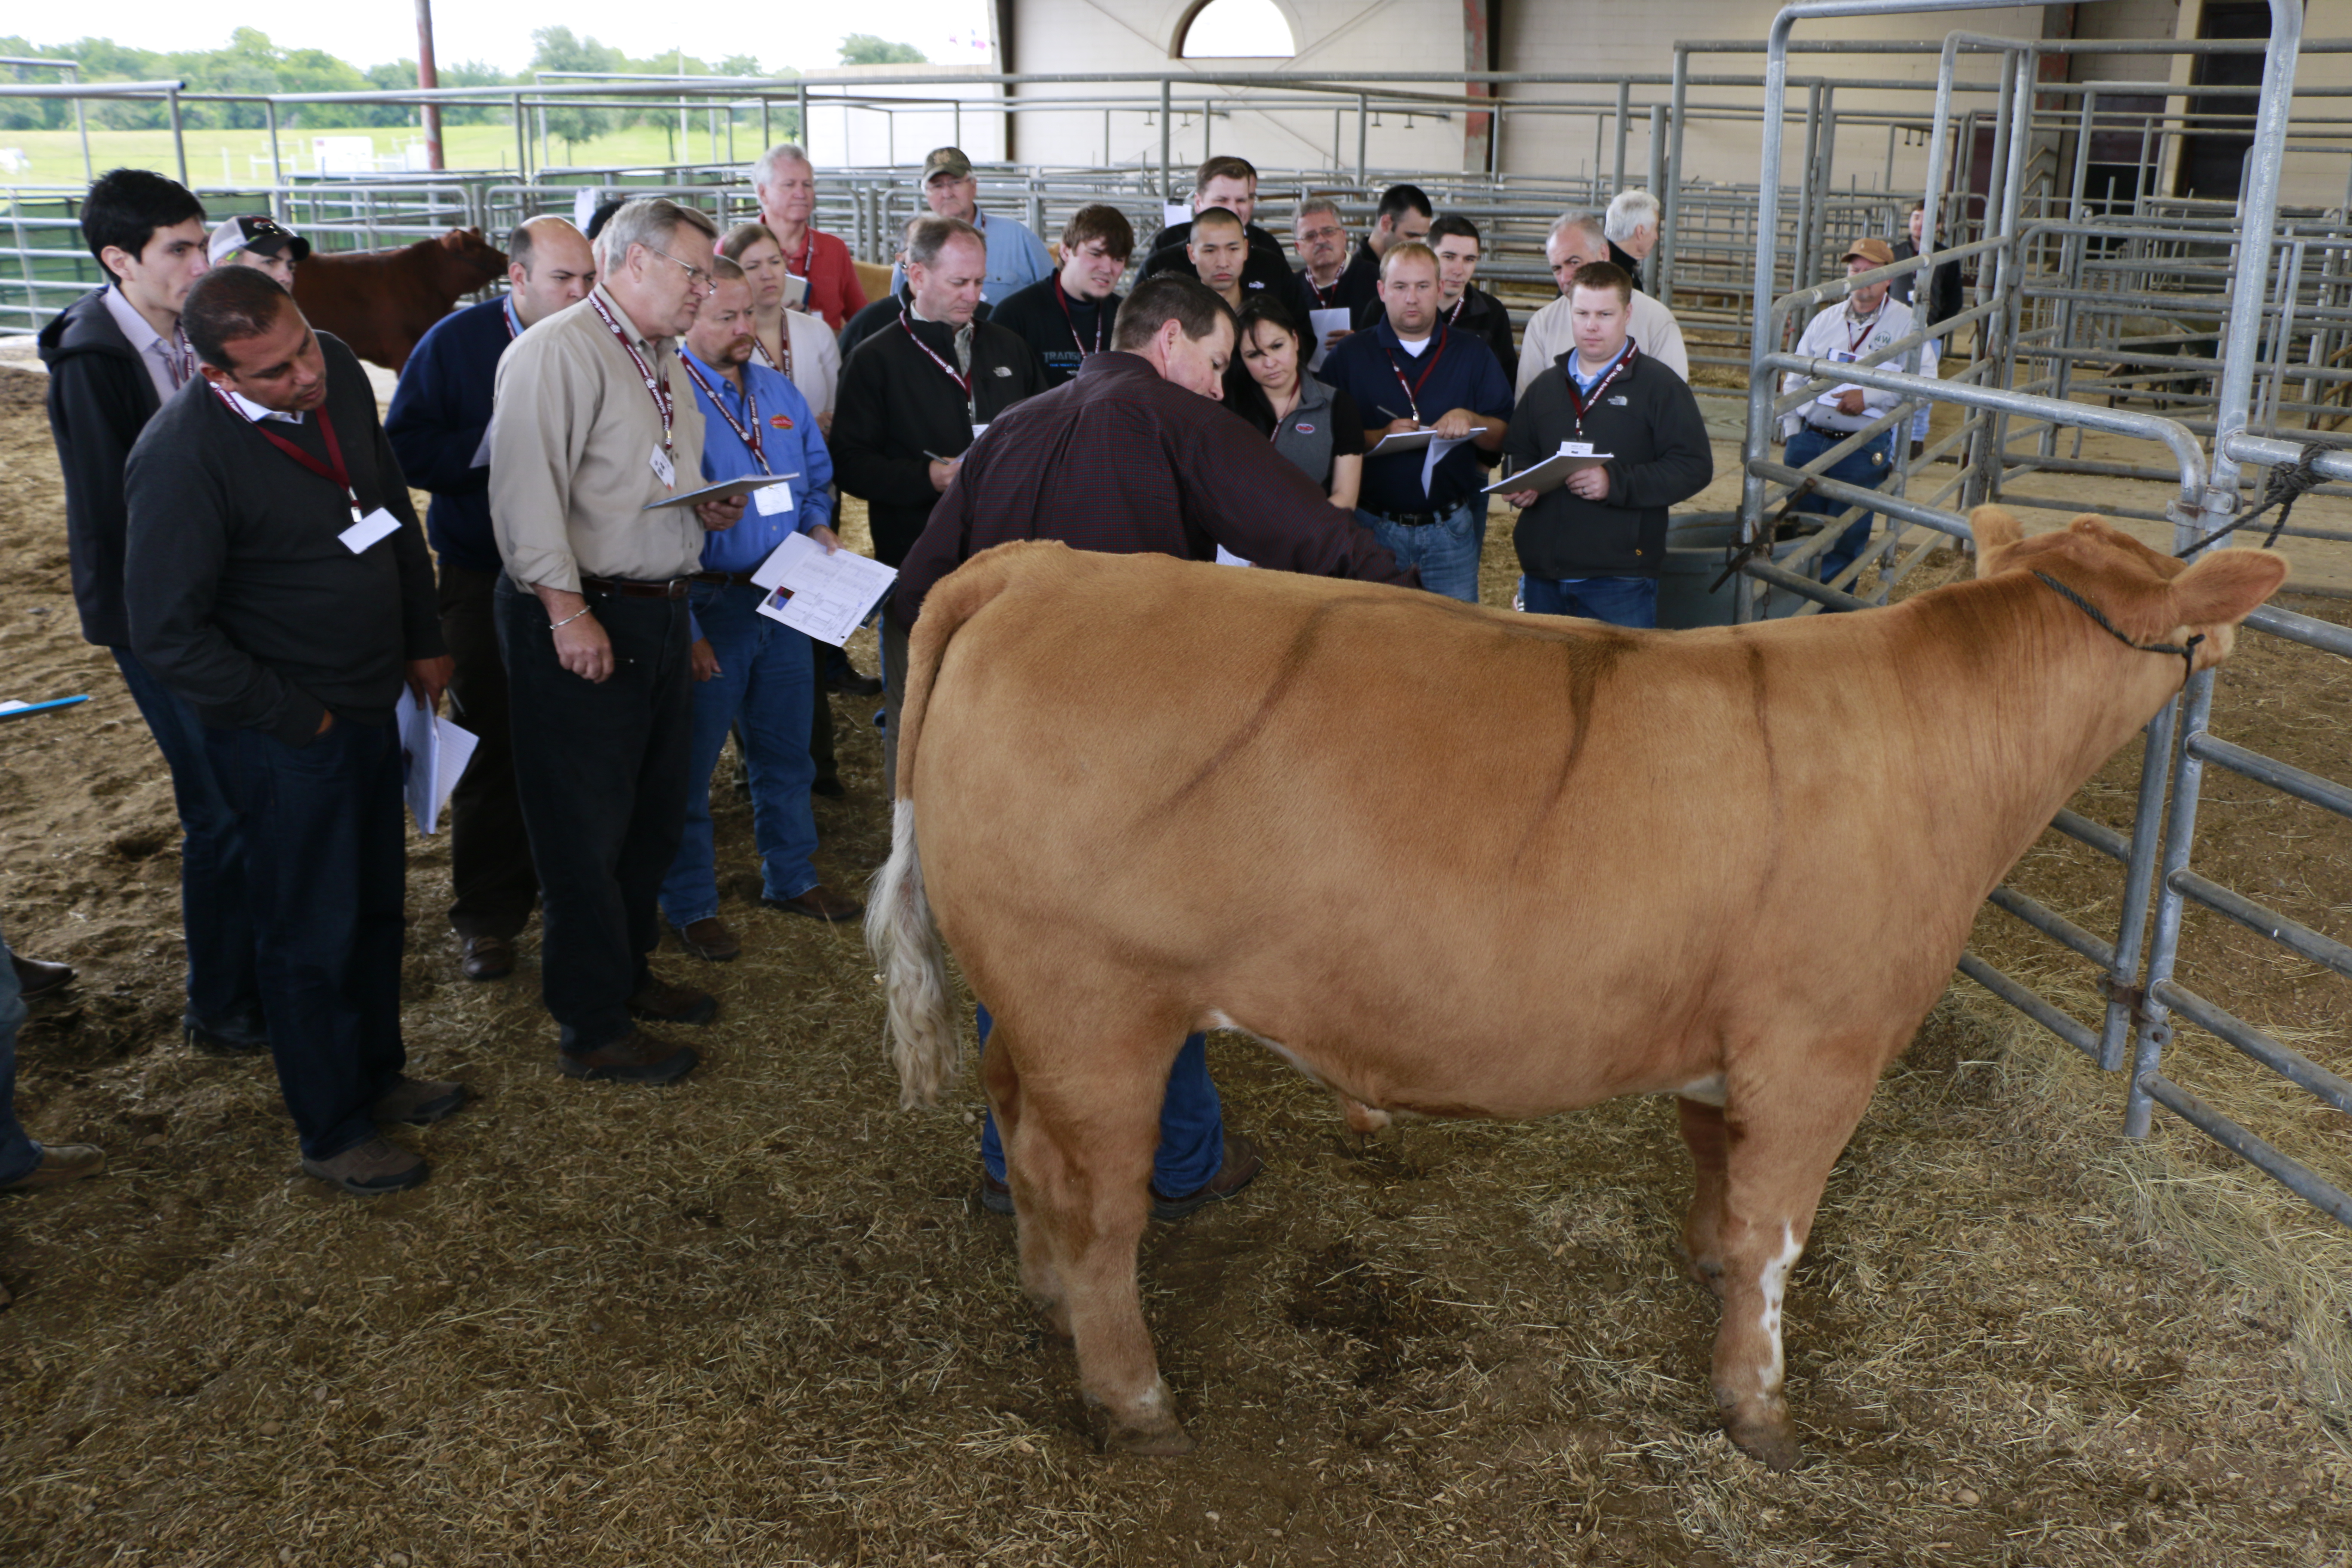 Participants evaluating steer